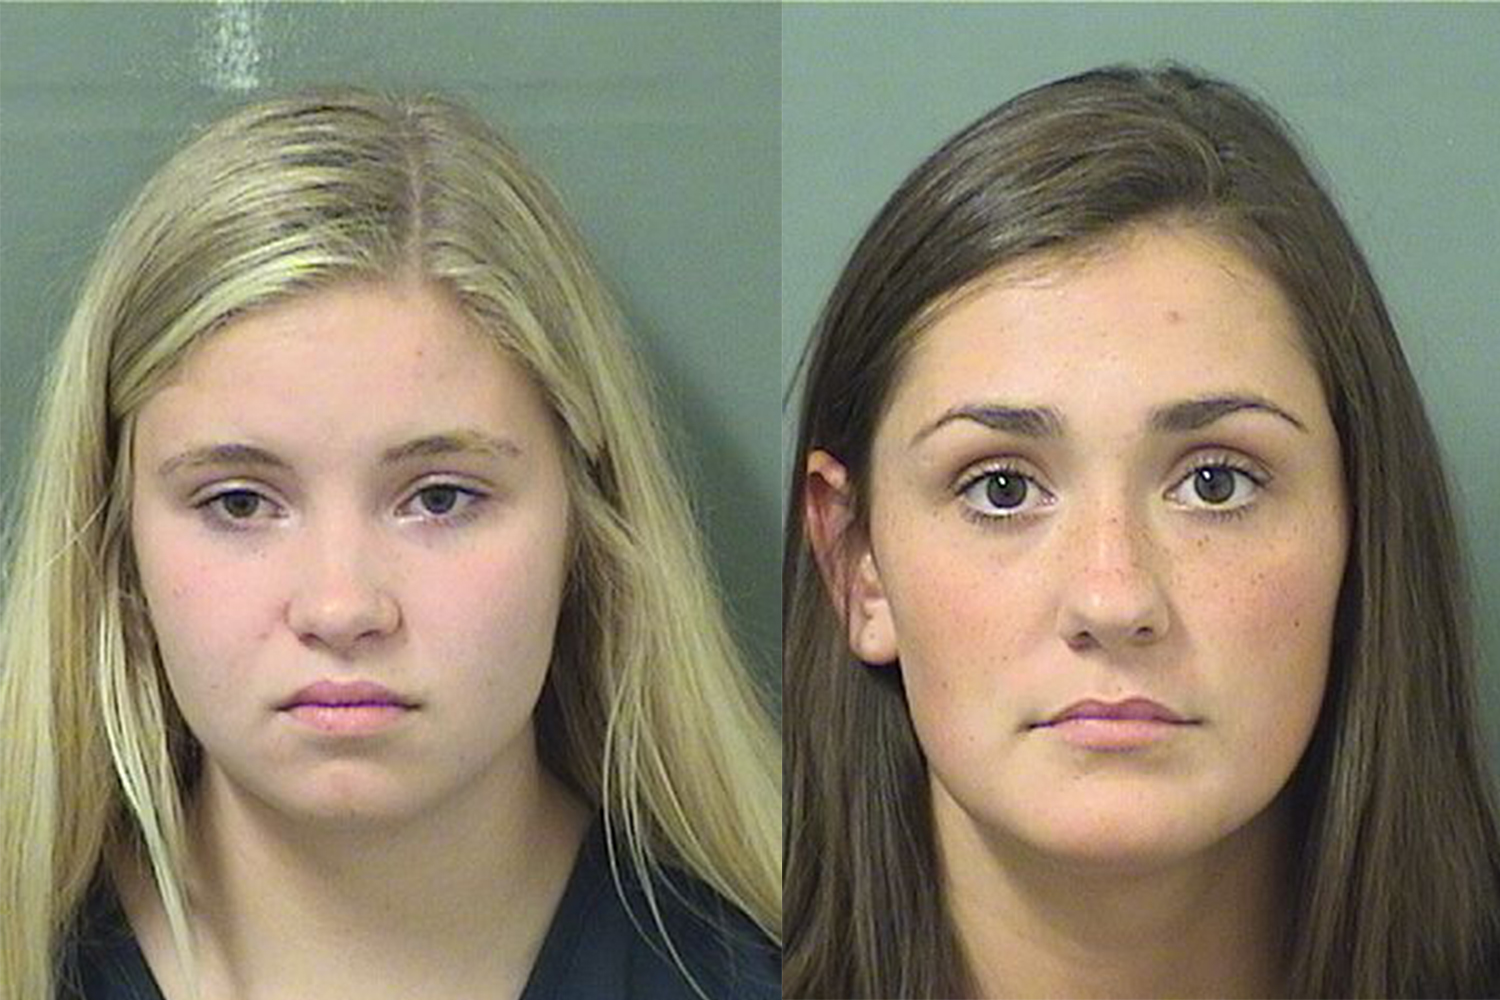 Koreen Varney (left) and Emily Hise. Photos courtesy of Palm Beach County Sheriffs Office.